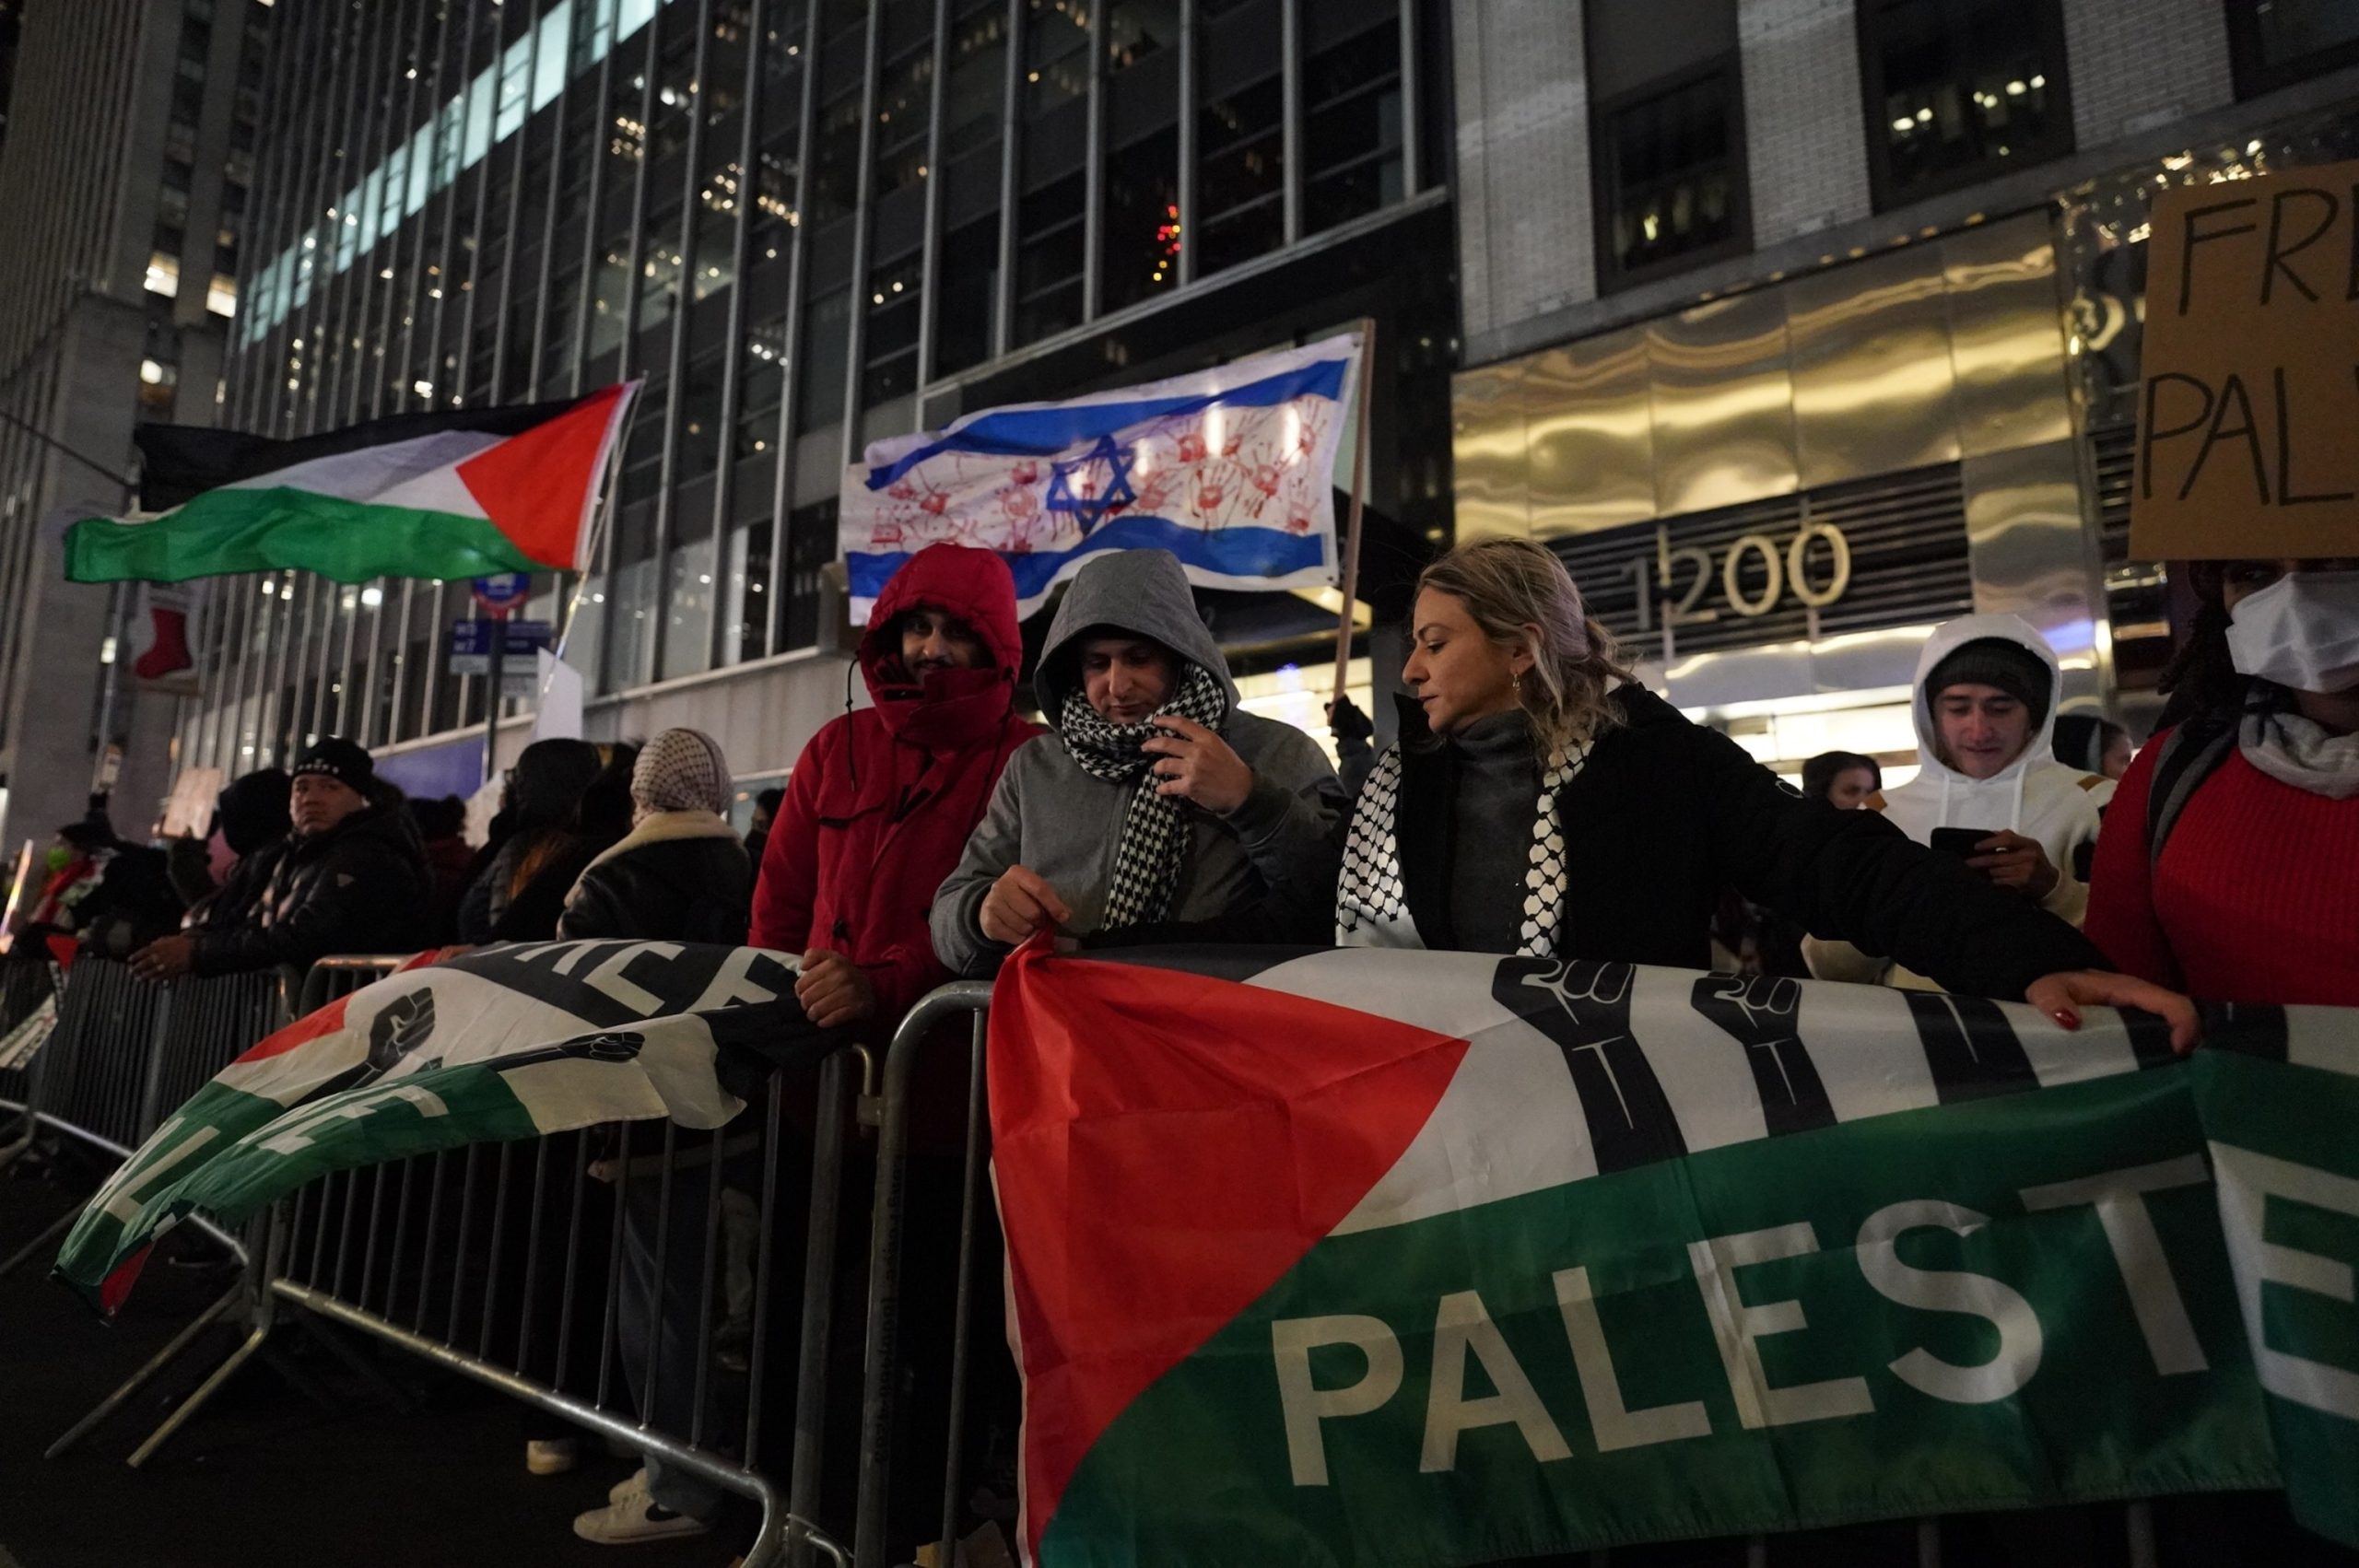 Multiple individuals detained during a pro-Palestinian protest near Rockefeller Center tree lighting event